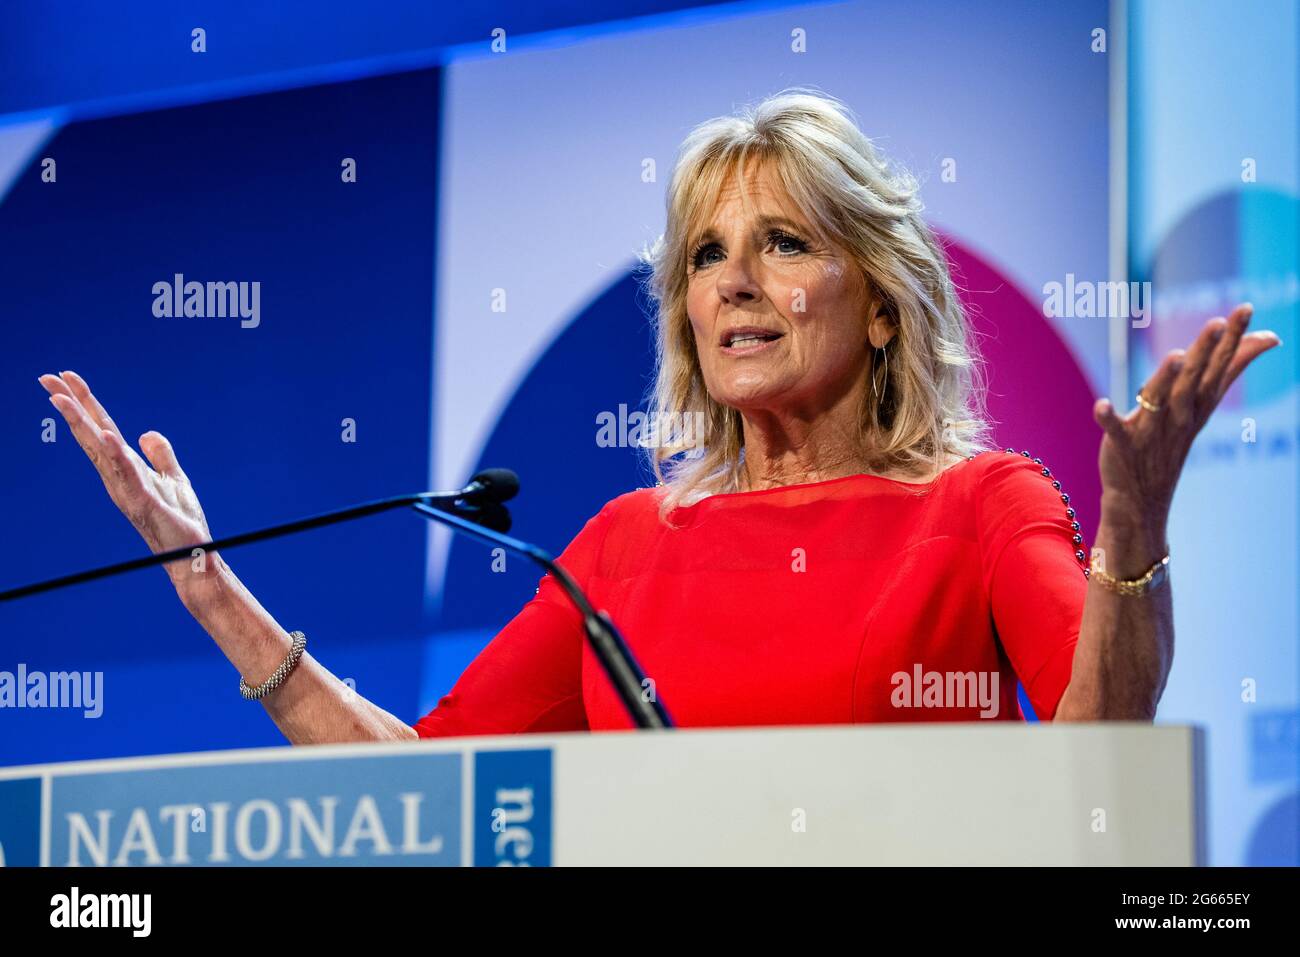 First lady Dr. Jill Biden speaks during the National Education Association's annual meeting and representative assembly event in Washington, DC, U.S., on Friday, July 2, 2021. U.S. job growth accelerated in June, suggesting firms are having greater success recruiting workers to keep pace with the broadening of economic activity.Credit: Samuel Corum/Pool via CNP /MediaPunch Stock Photo